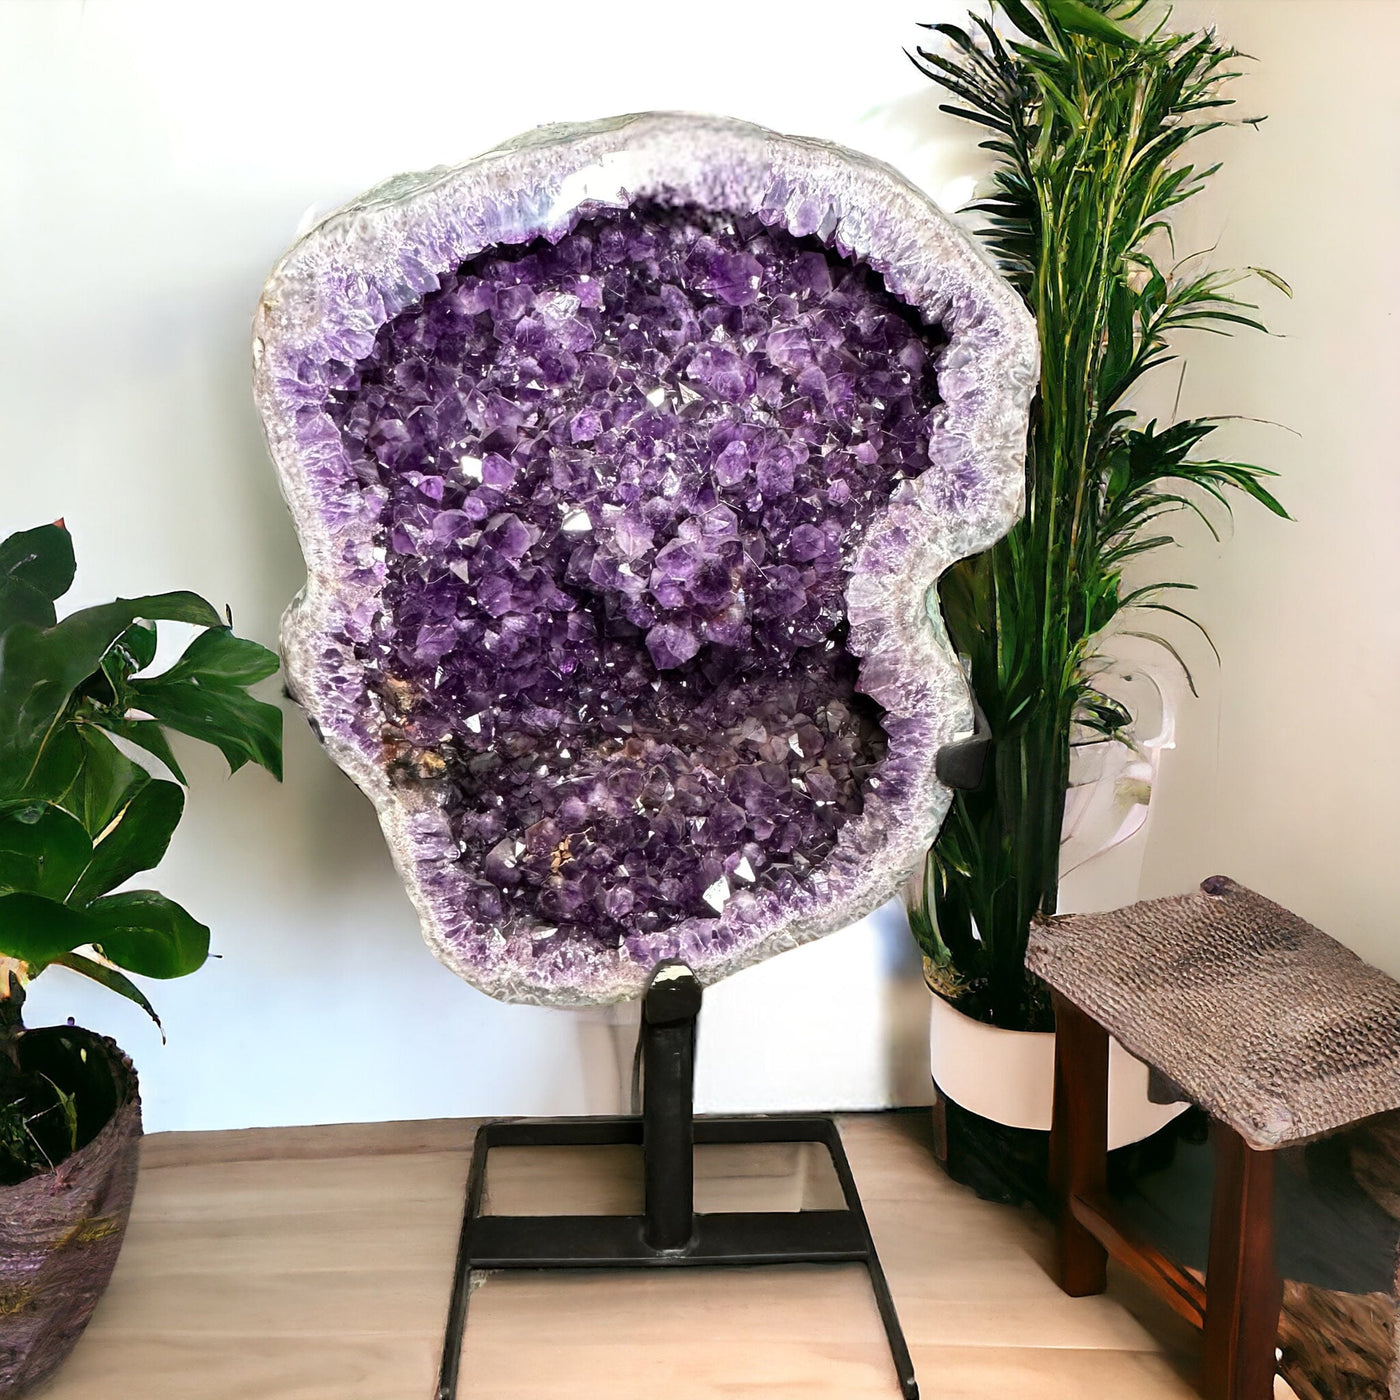 Amethyst Cluster on Rotating Metal Stand - Large Crystal Decor